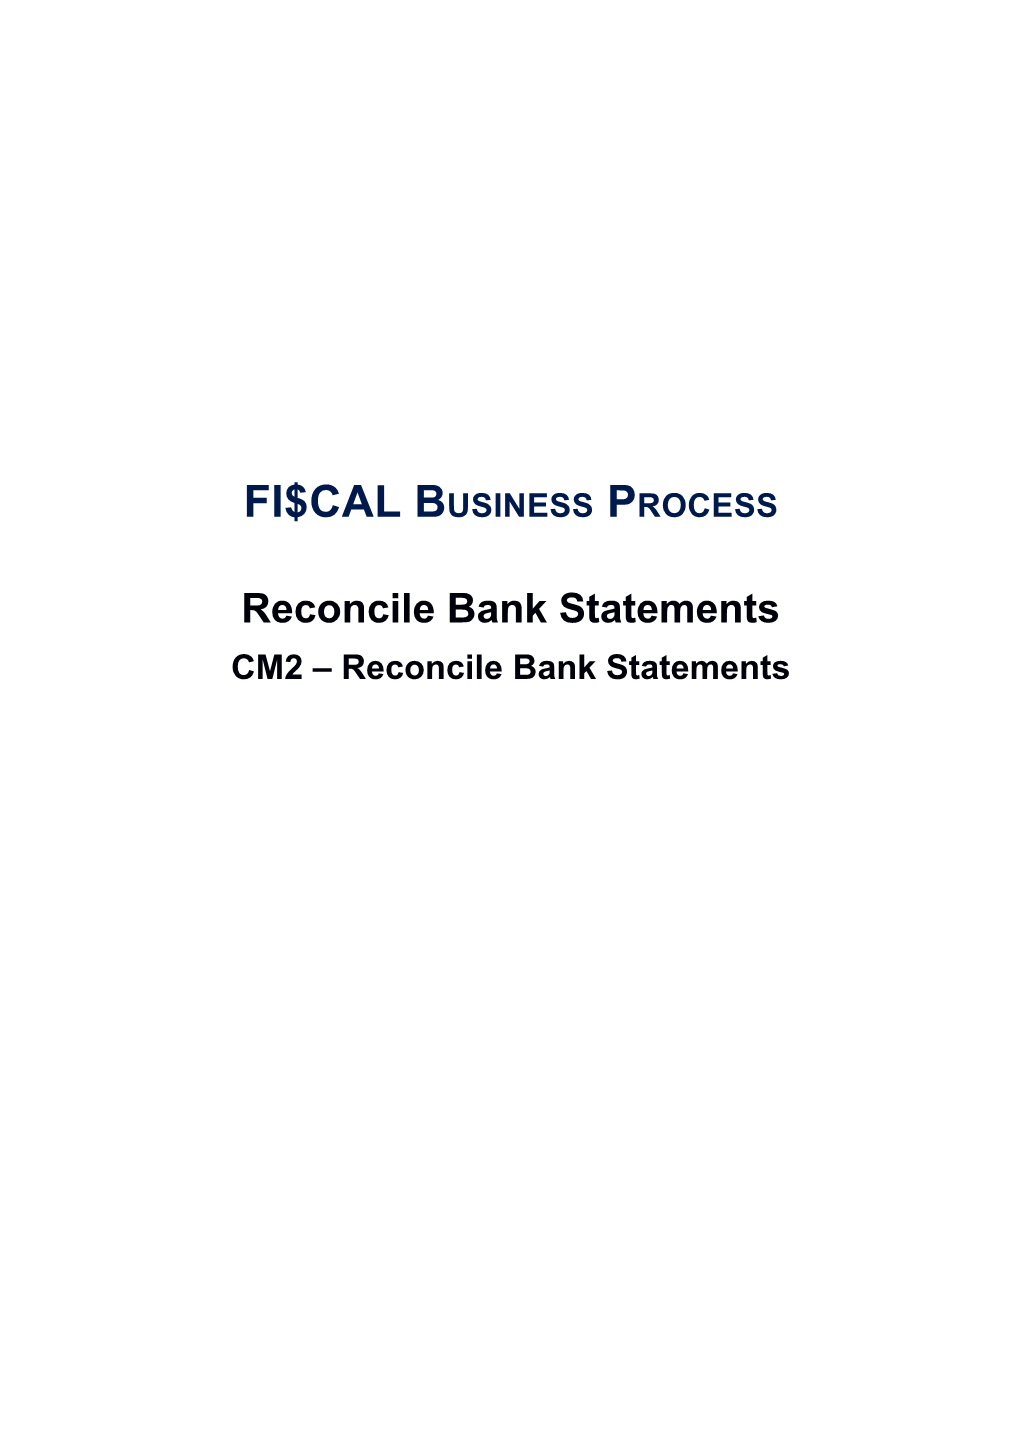 Reconcile Bank Statements